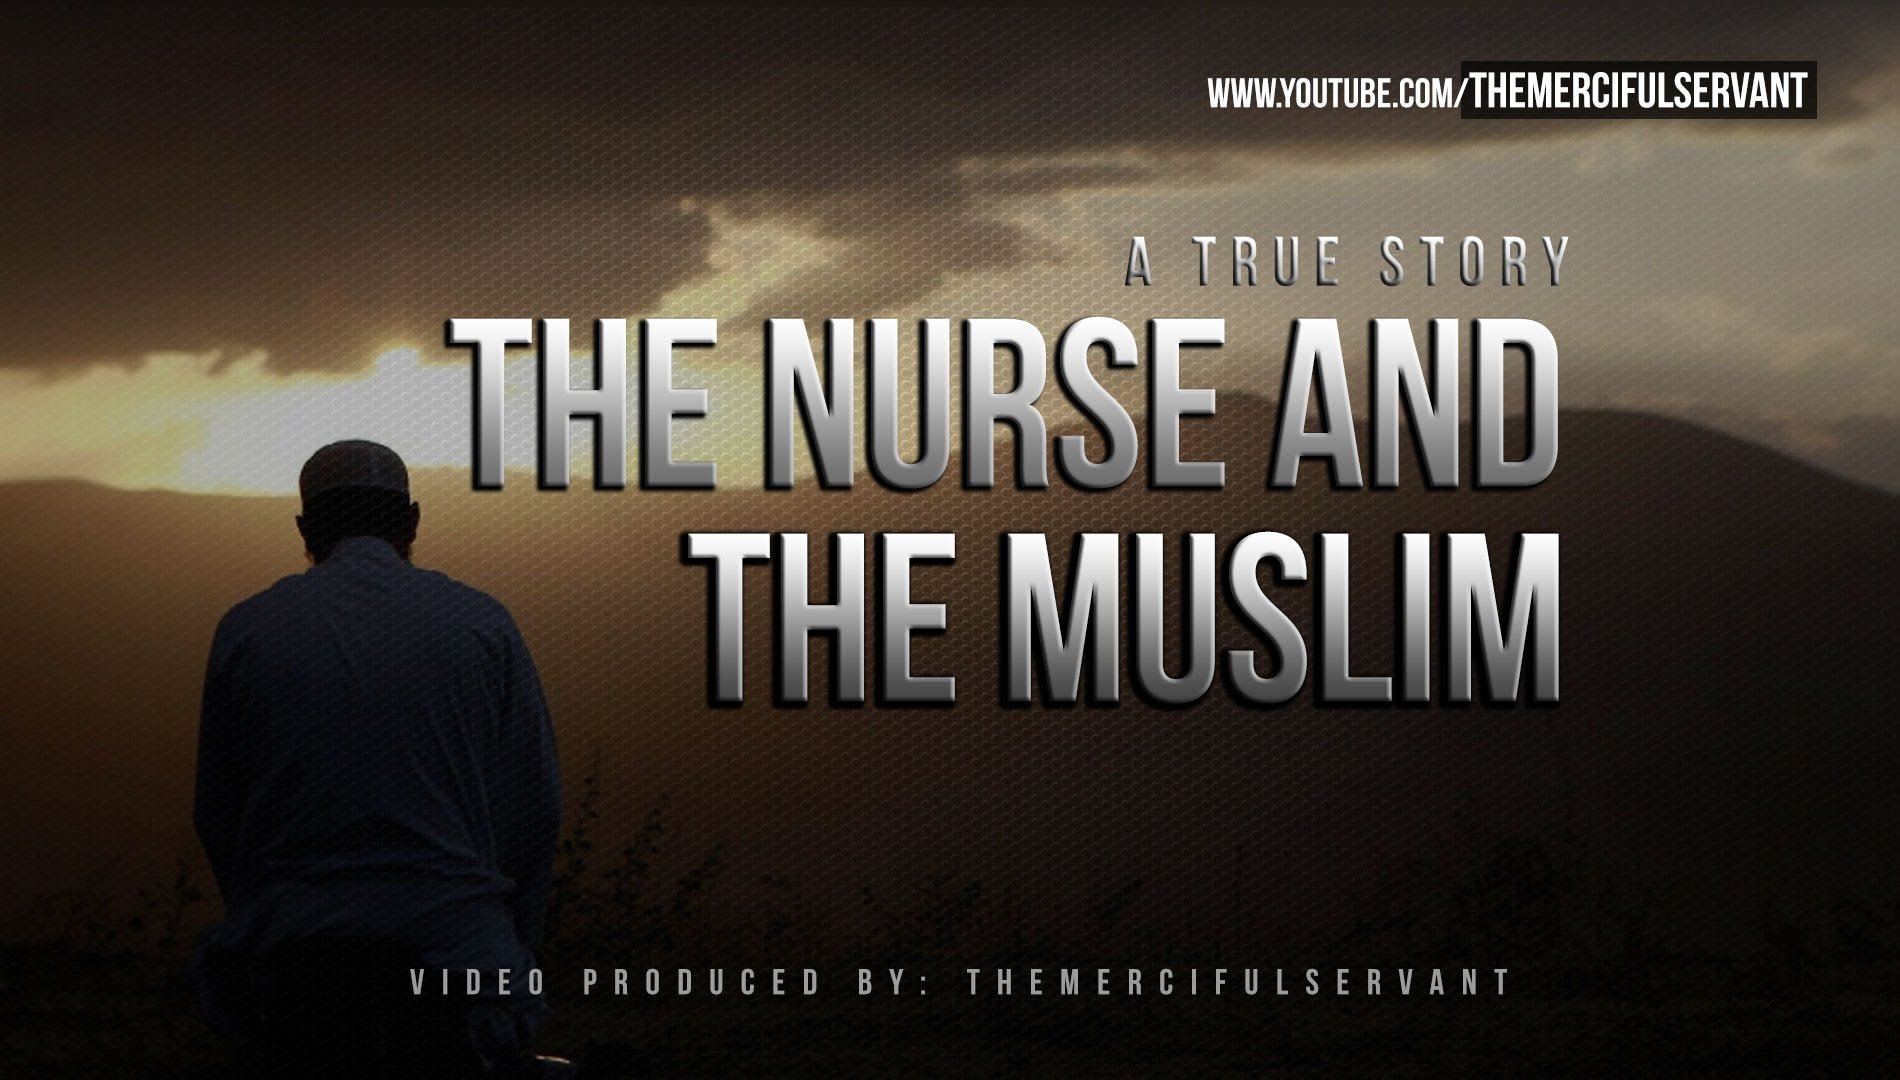 The Nurse and the Muslim ᴴᴰ - Emotional True Story